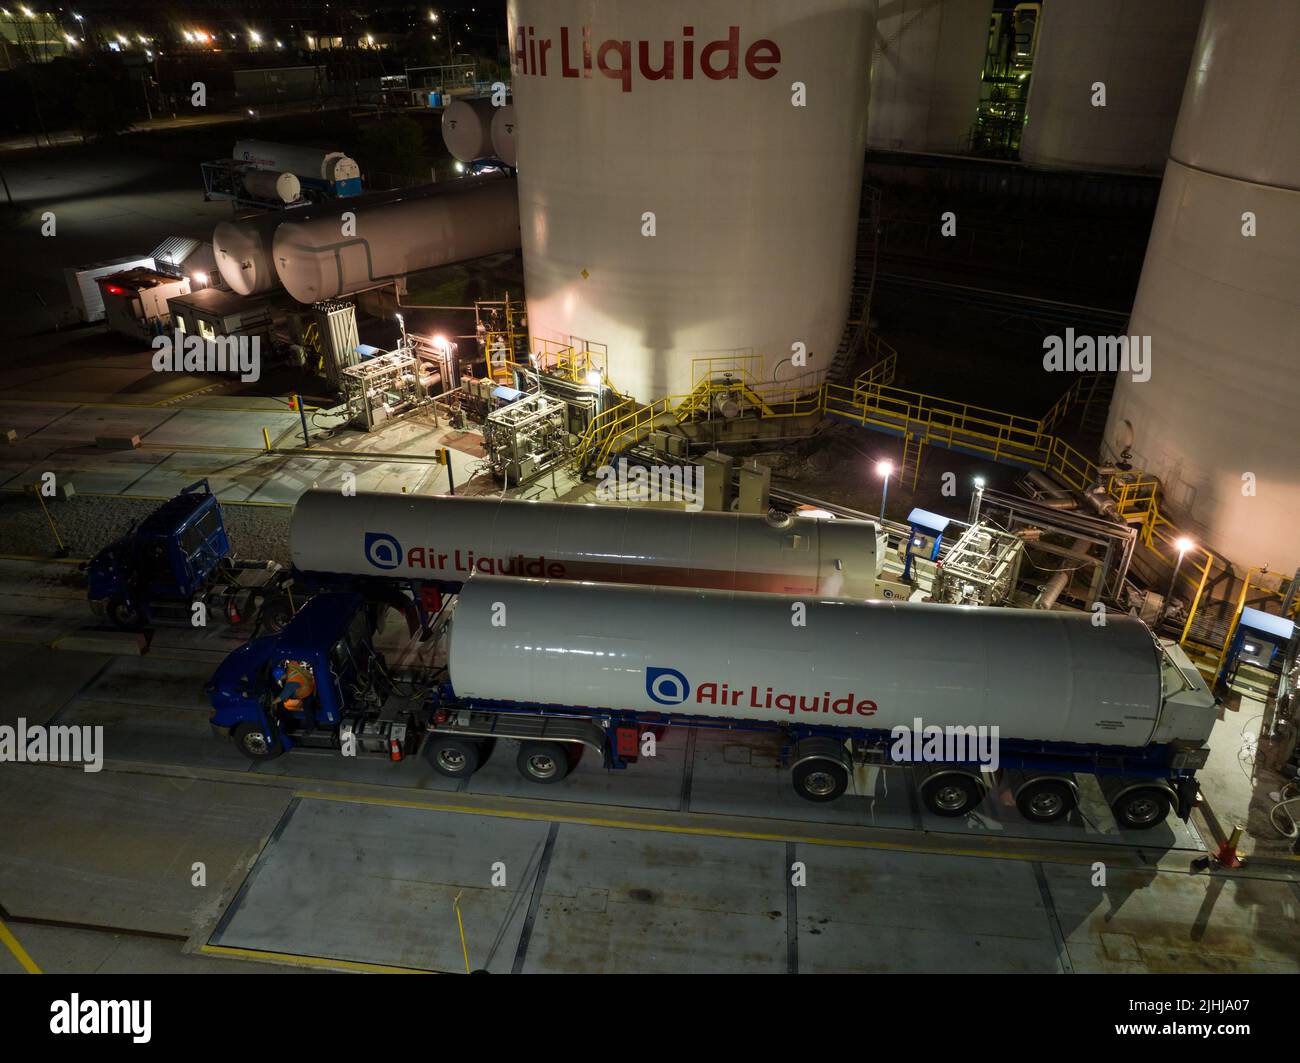 An aerial view of Air Liquide trucks being filled at an Air Liquide facility, an industrial gases and services provider, seen at night. Stock Photo